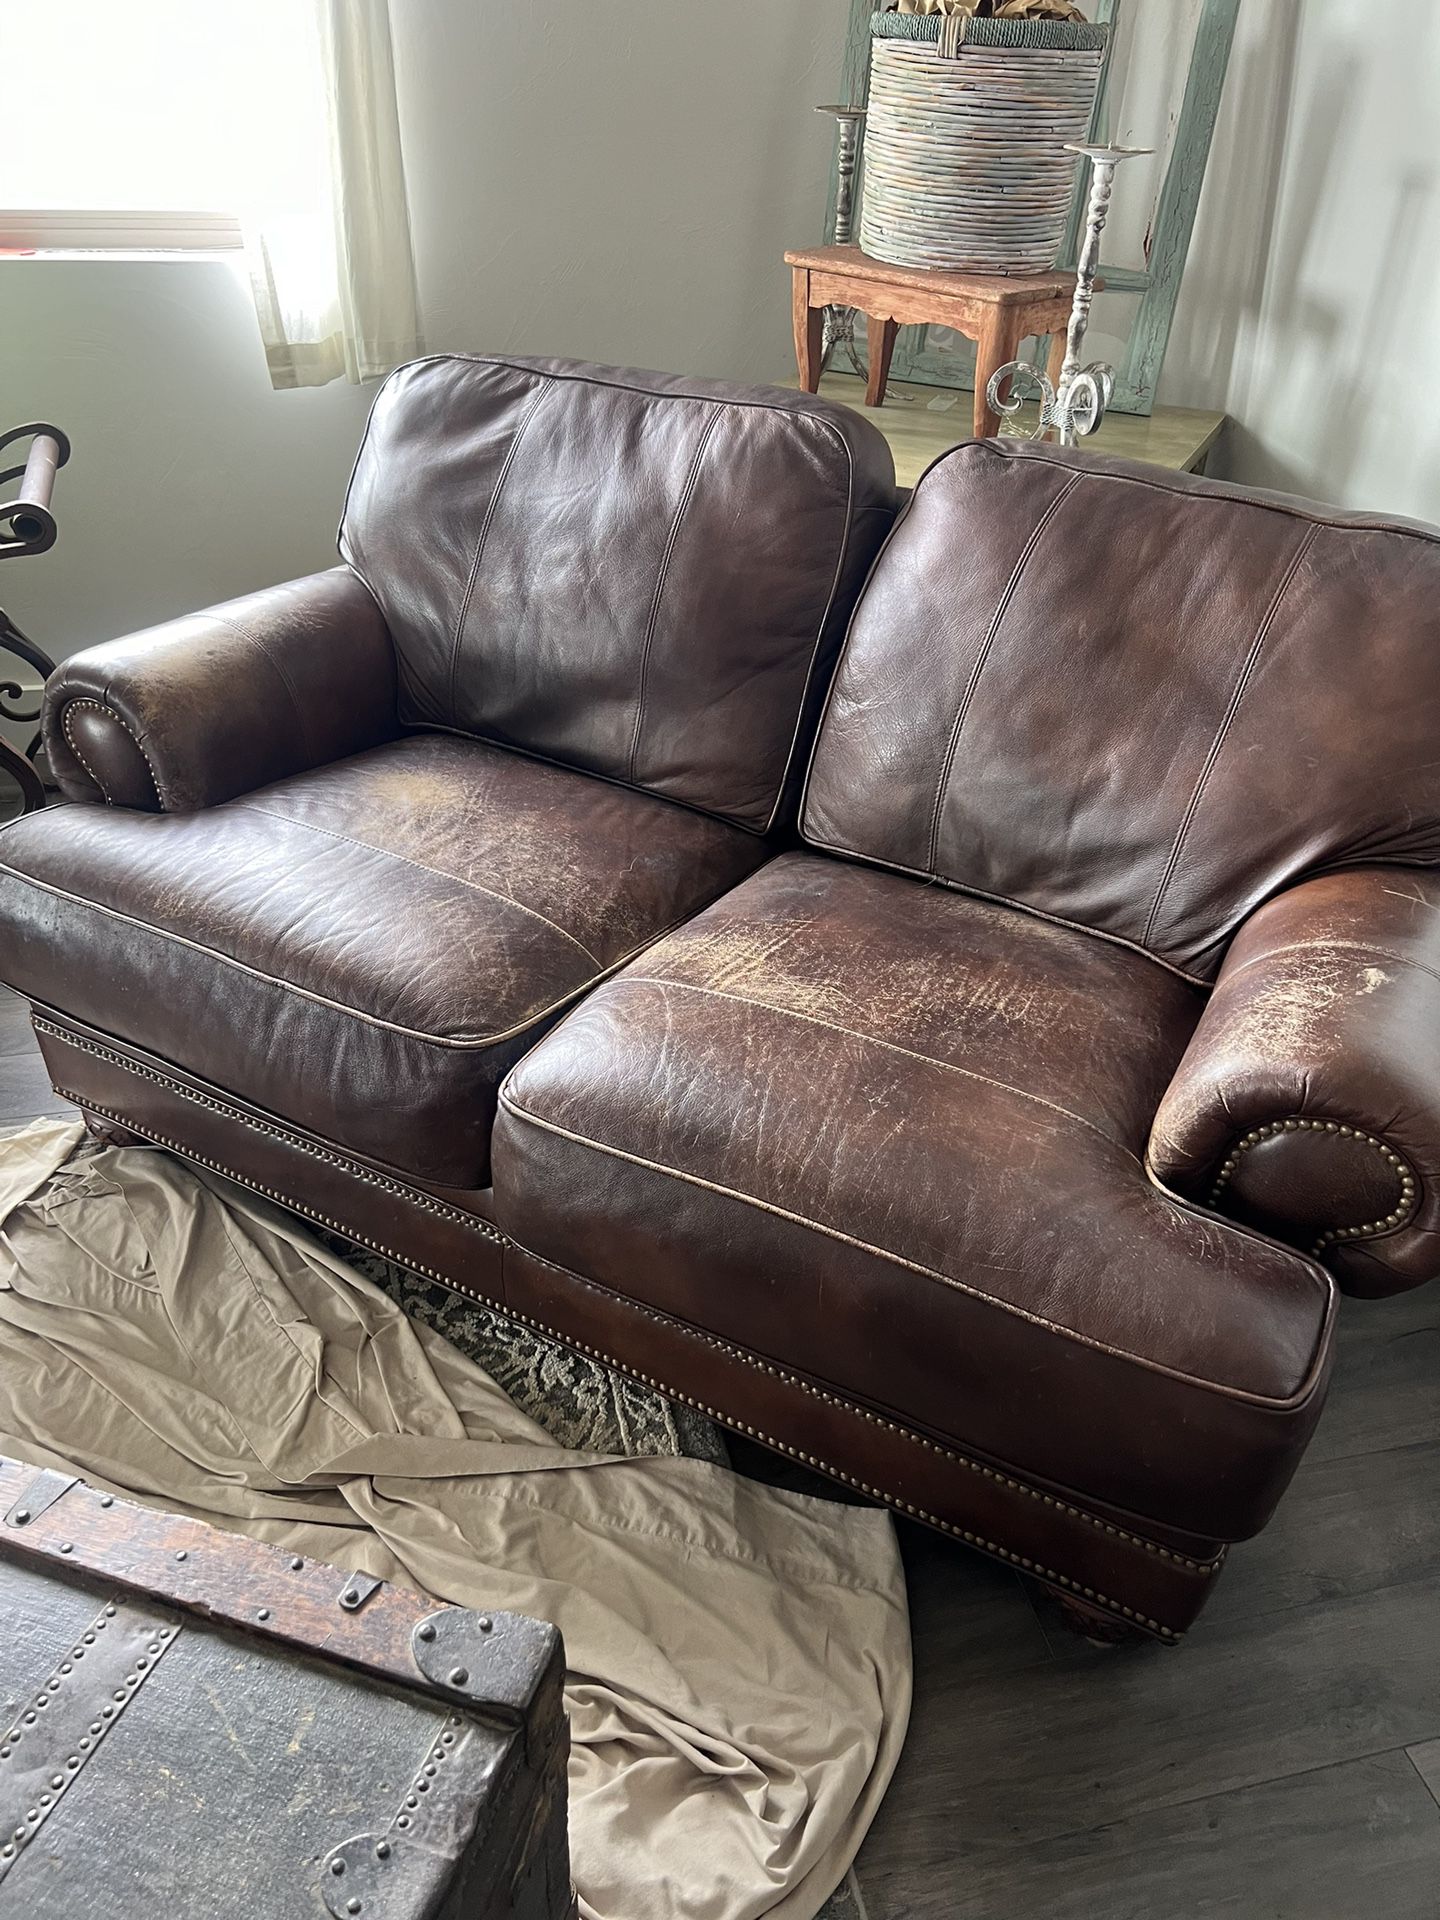 Free Brown Leather Love Seat Couch Free 